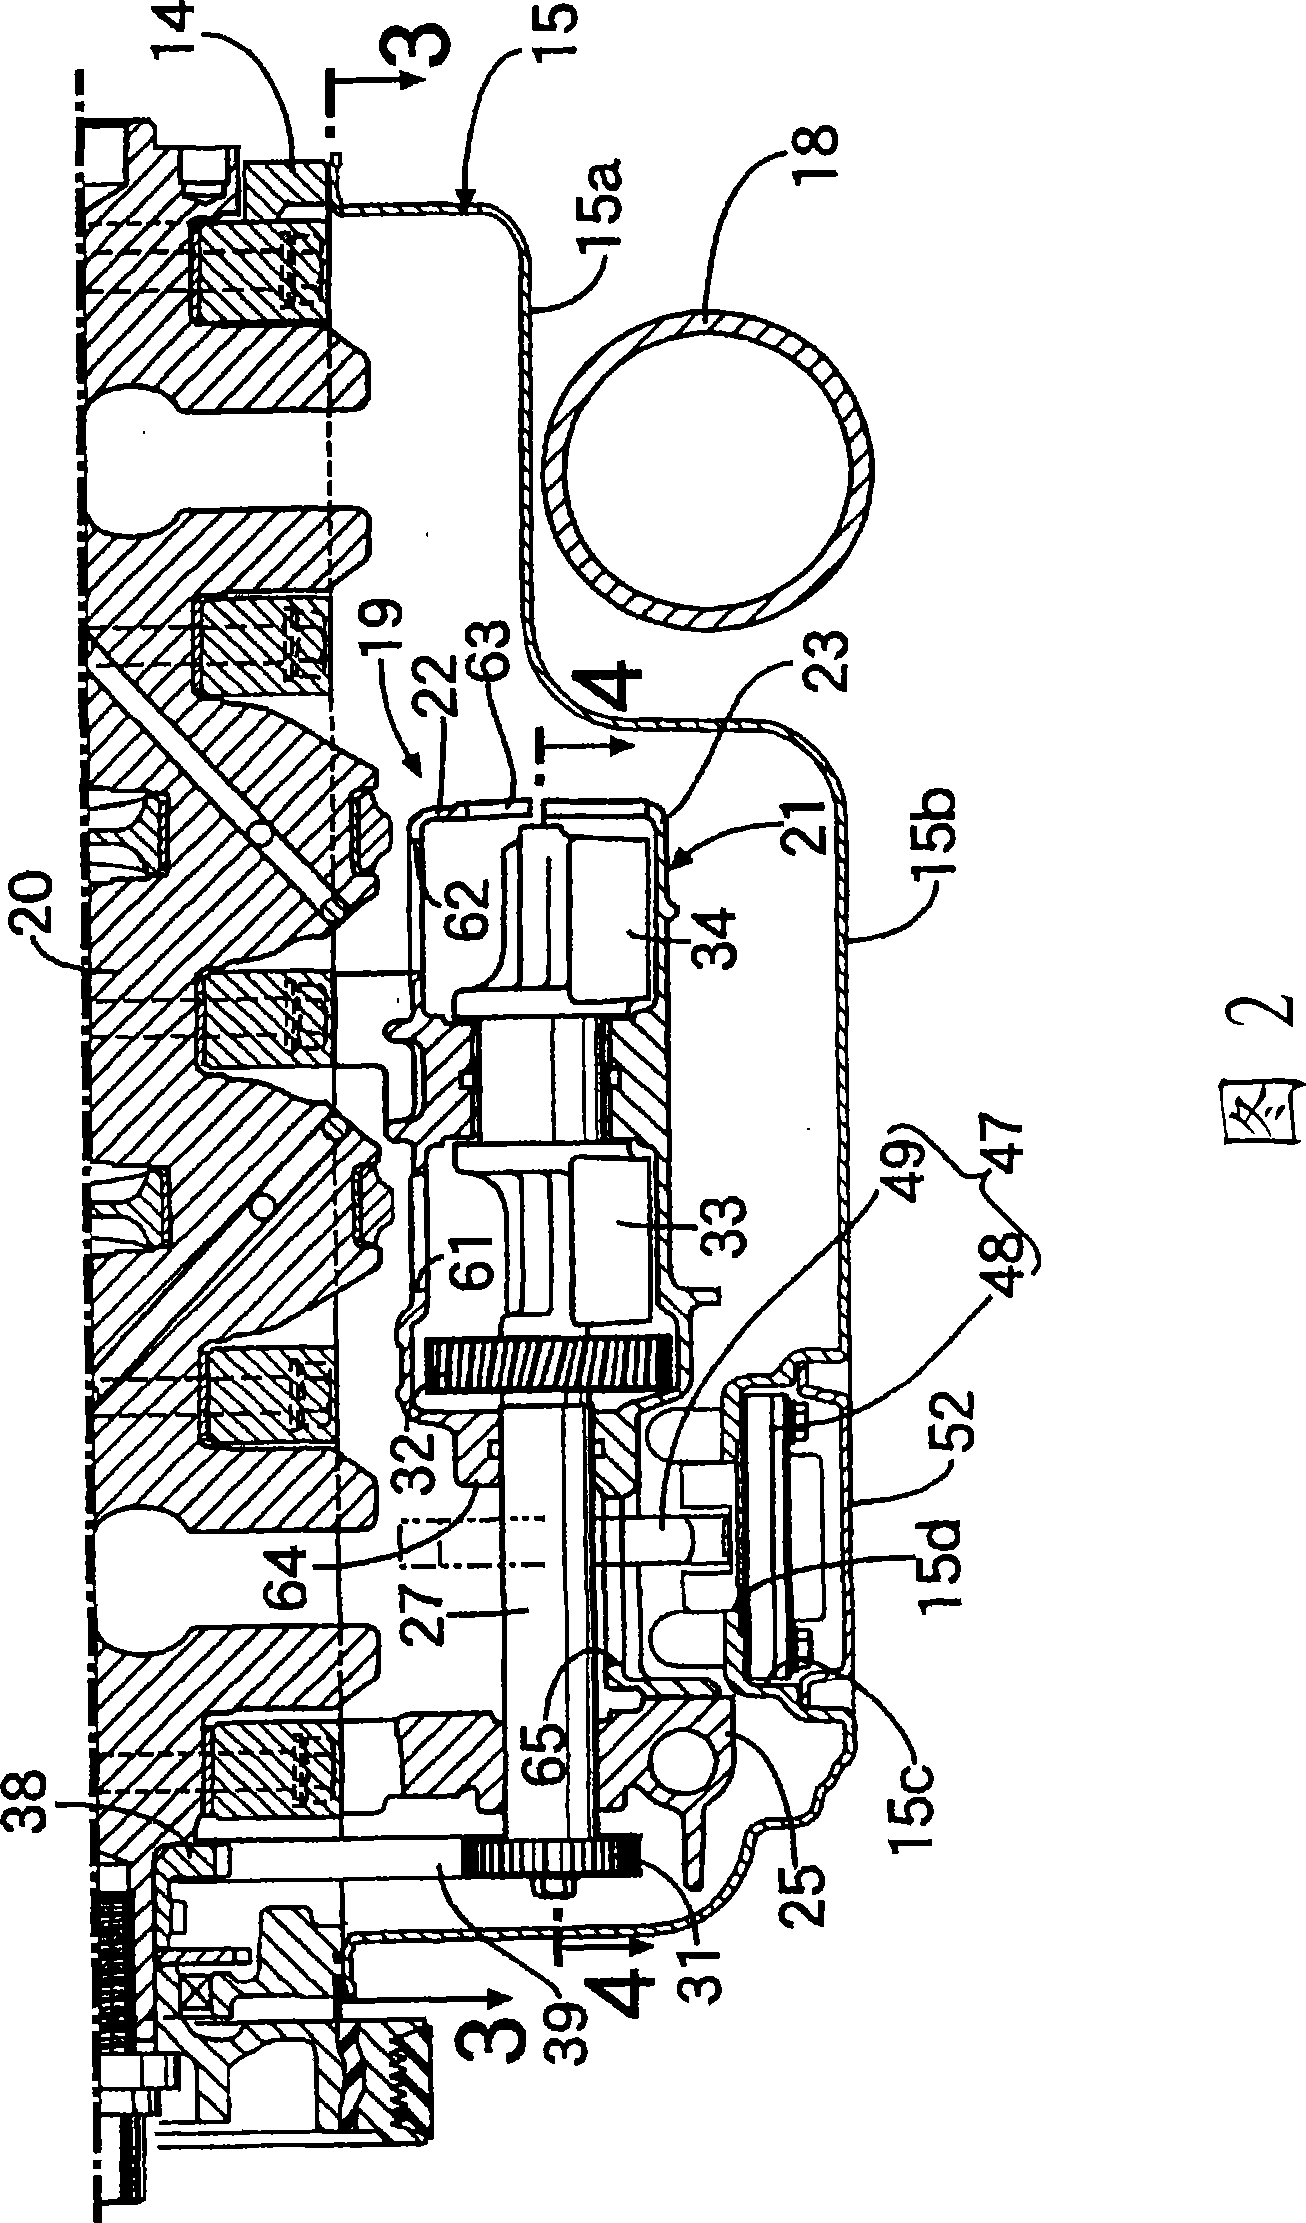 Oil sensor placement structure of engine